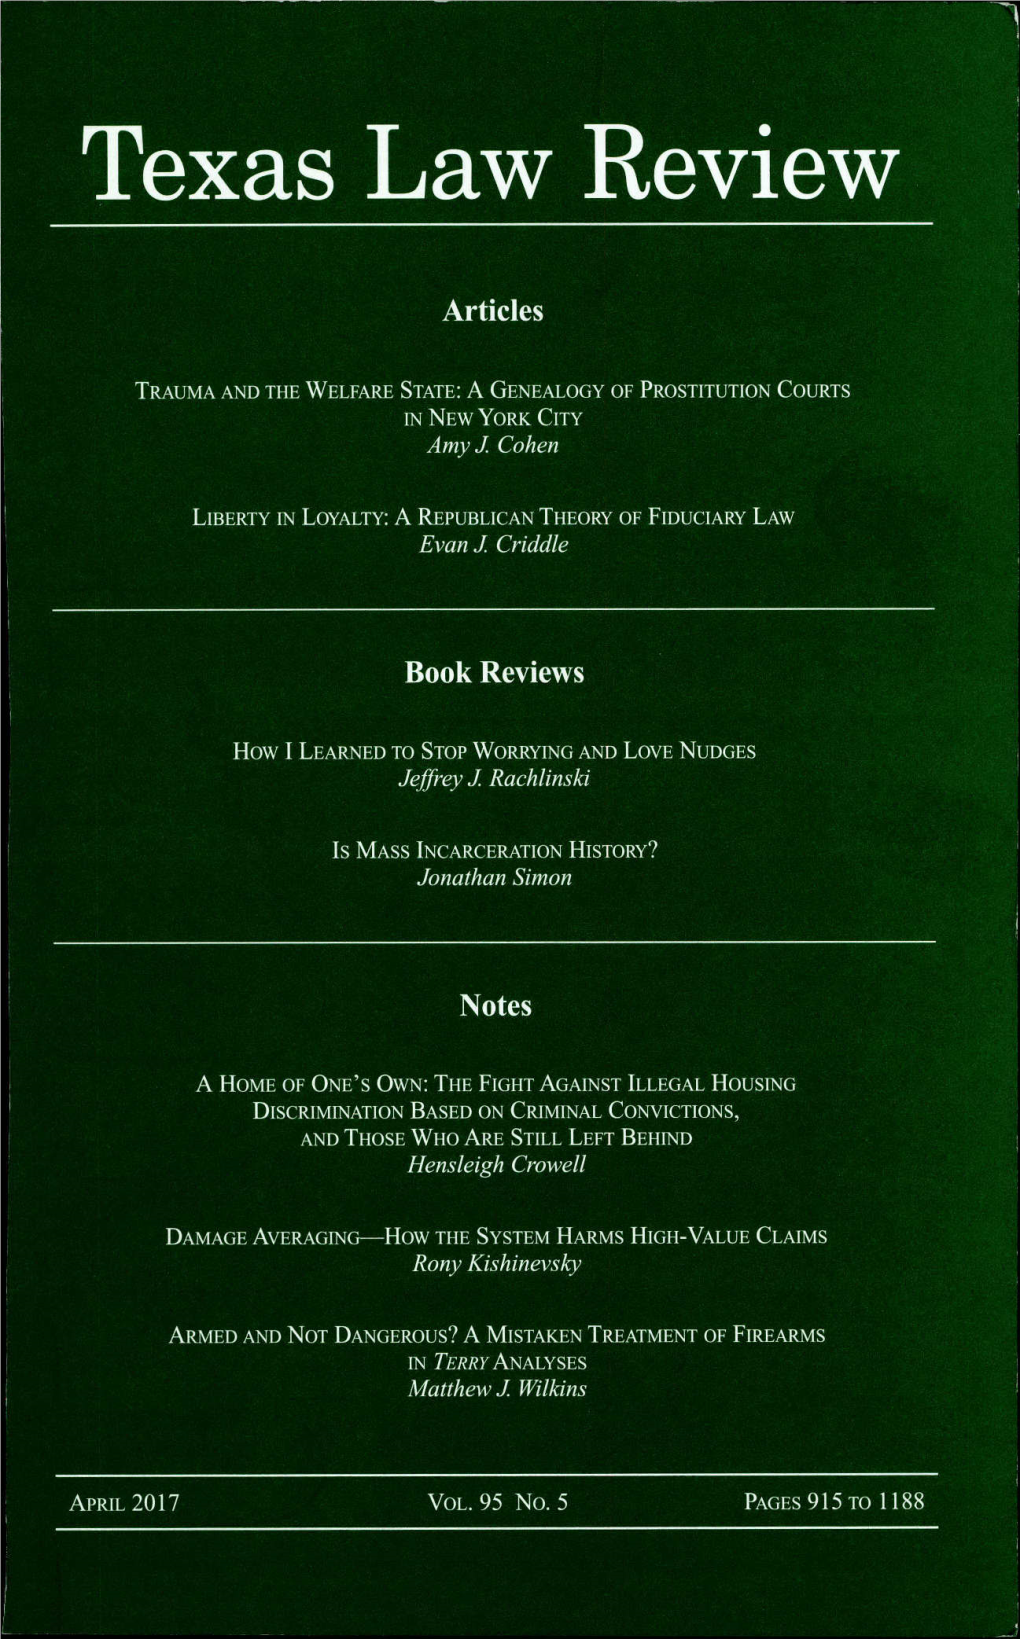 Texas Law Review a Nationaljournal Published Seven Times a Year Recent and Forthcoming Articles of Interest Visit for More on Recent Articles